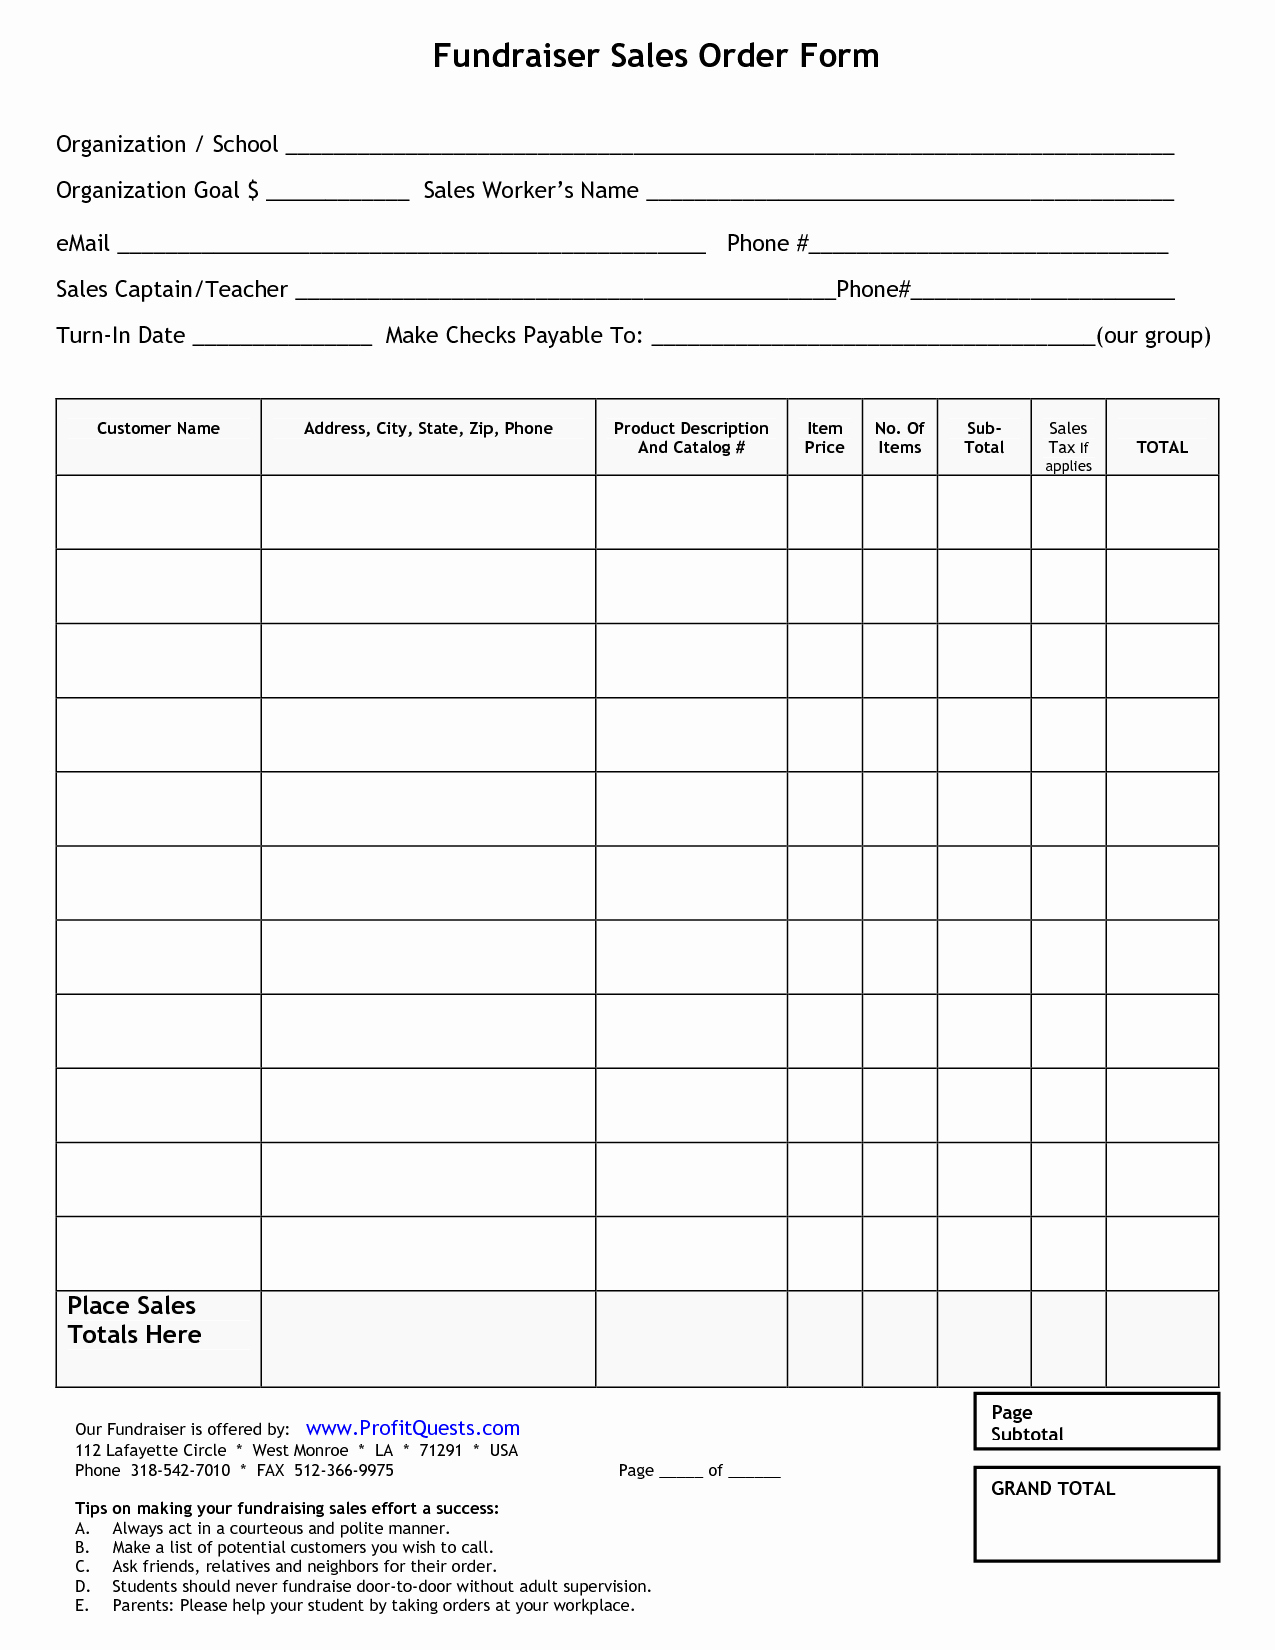 Sales order forms Templates Free Lovely Fundraiser order form